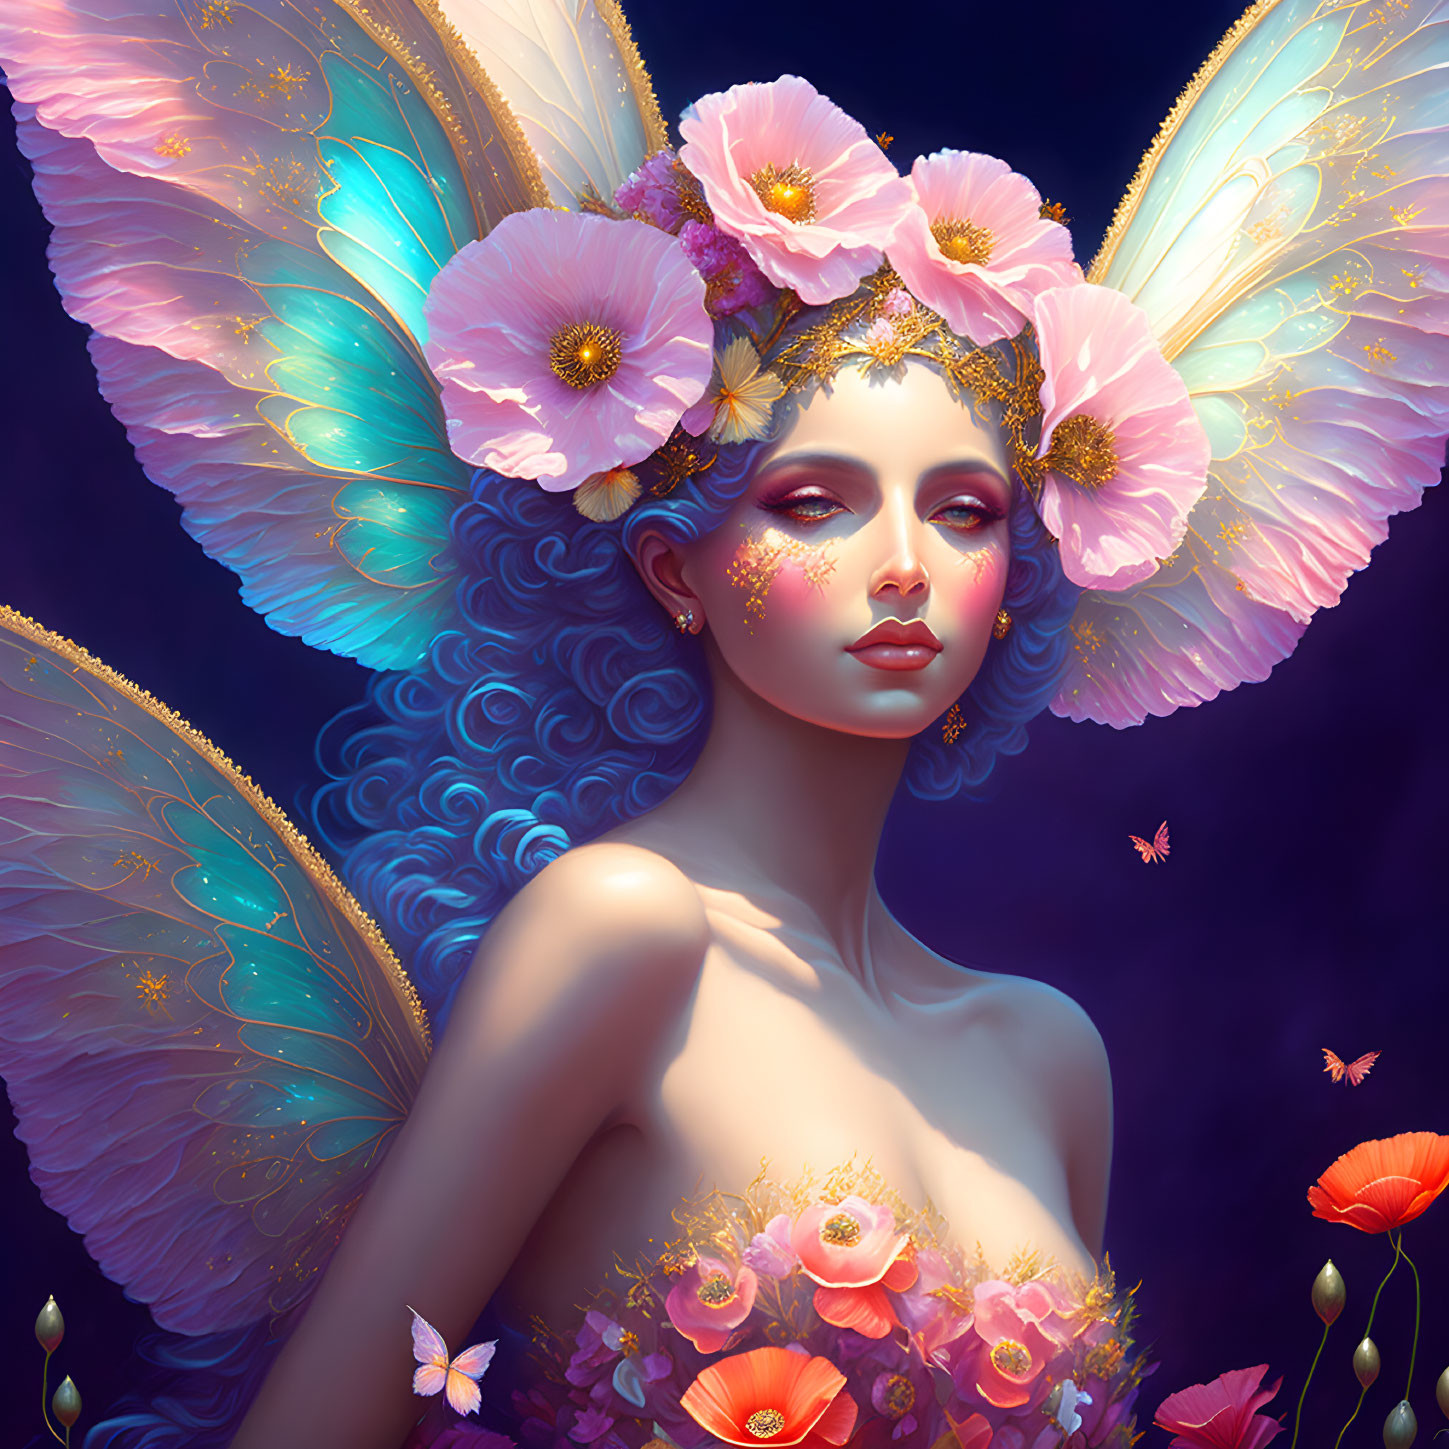 Fantastical portrait of a woman with iridescent butterfly wings and pink flower crown in dreamy